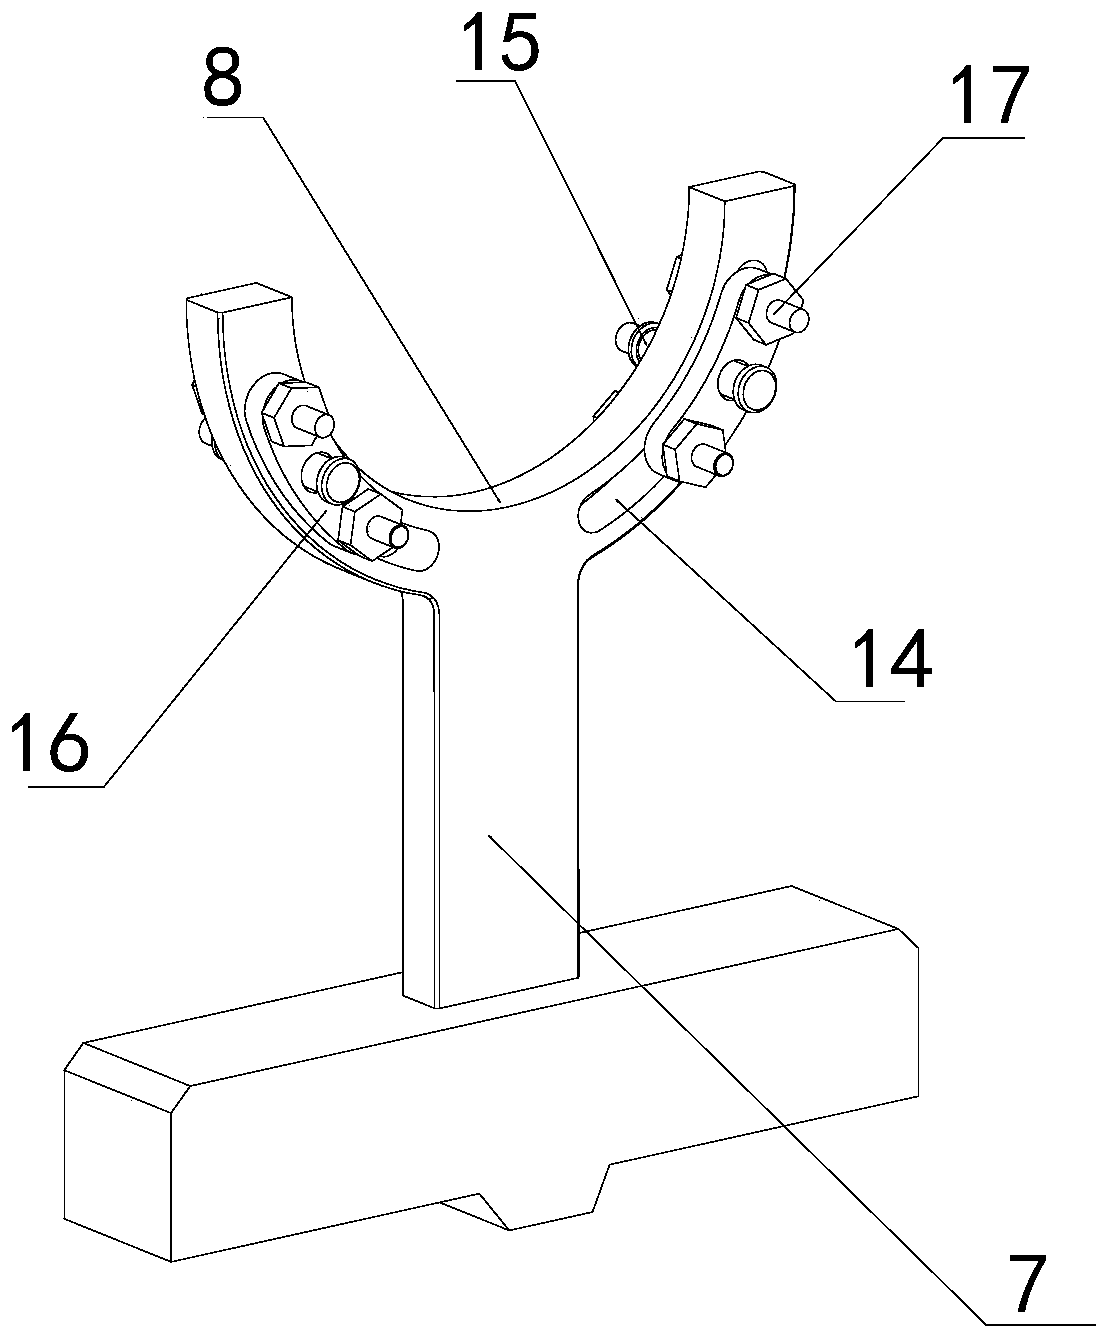 Automobile rear axle disassembling device